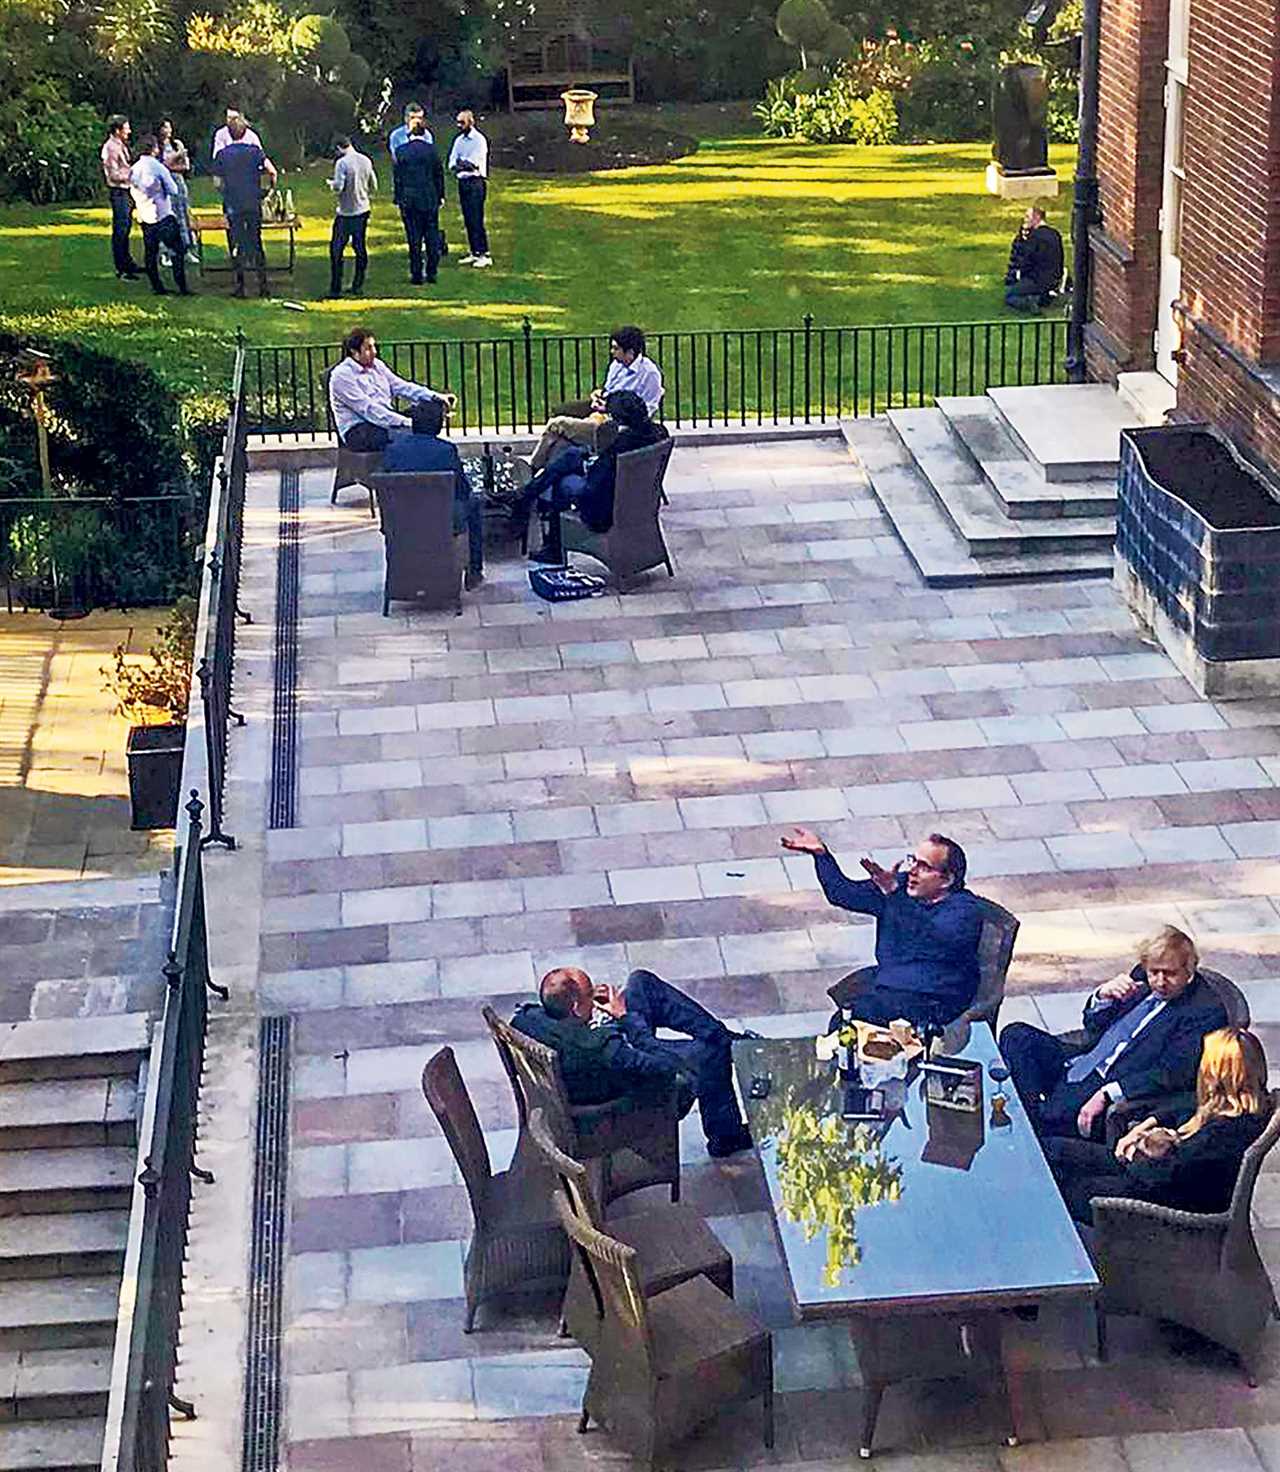 A picture of another gathering in the Downing St garden Credit: Guardian